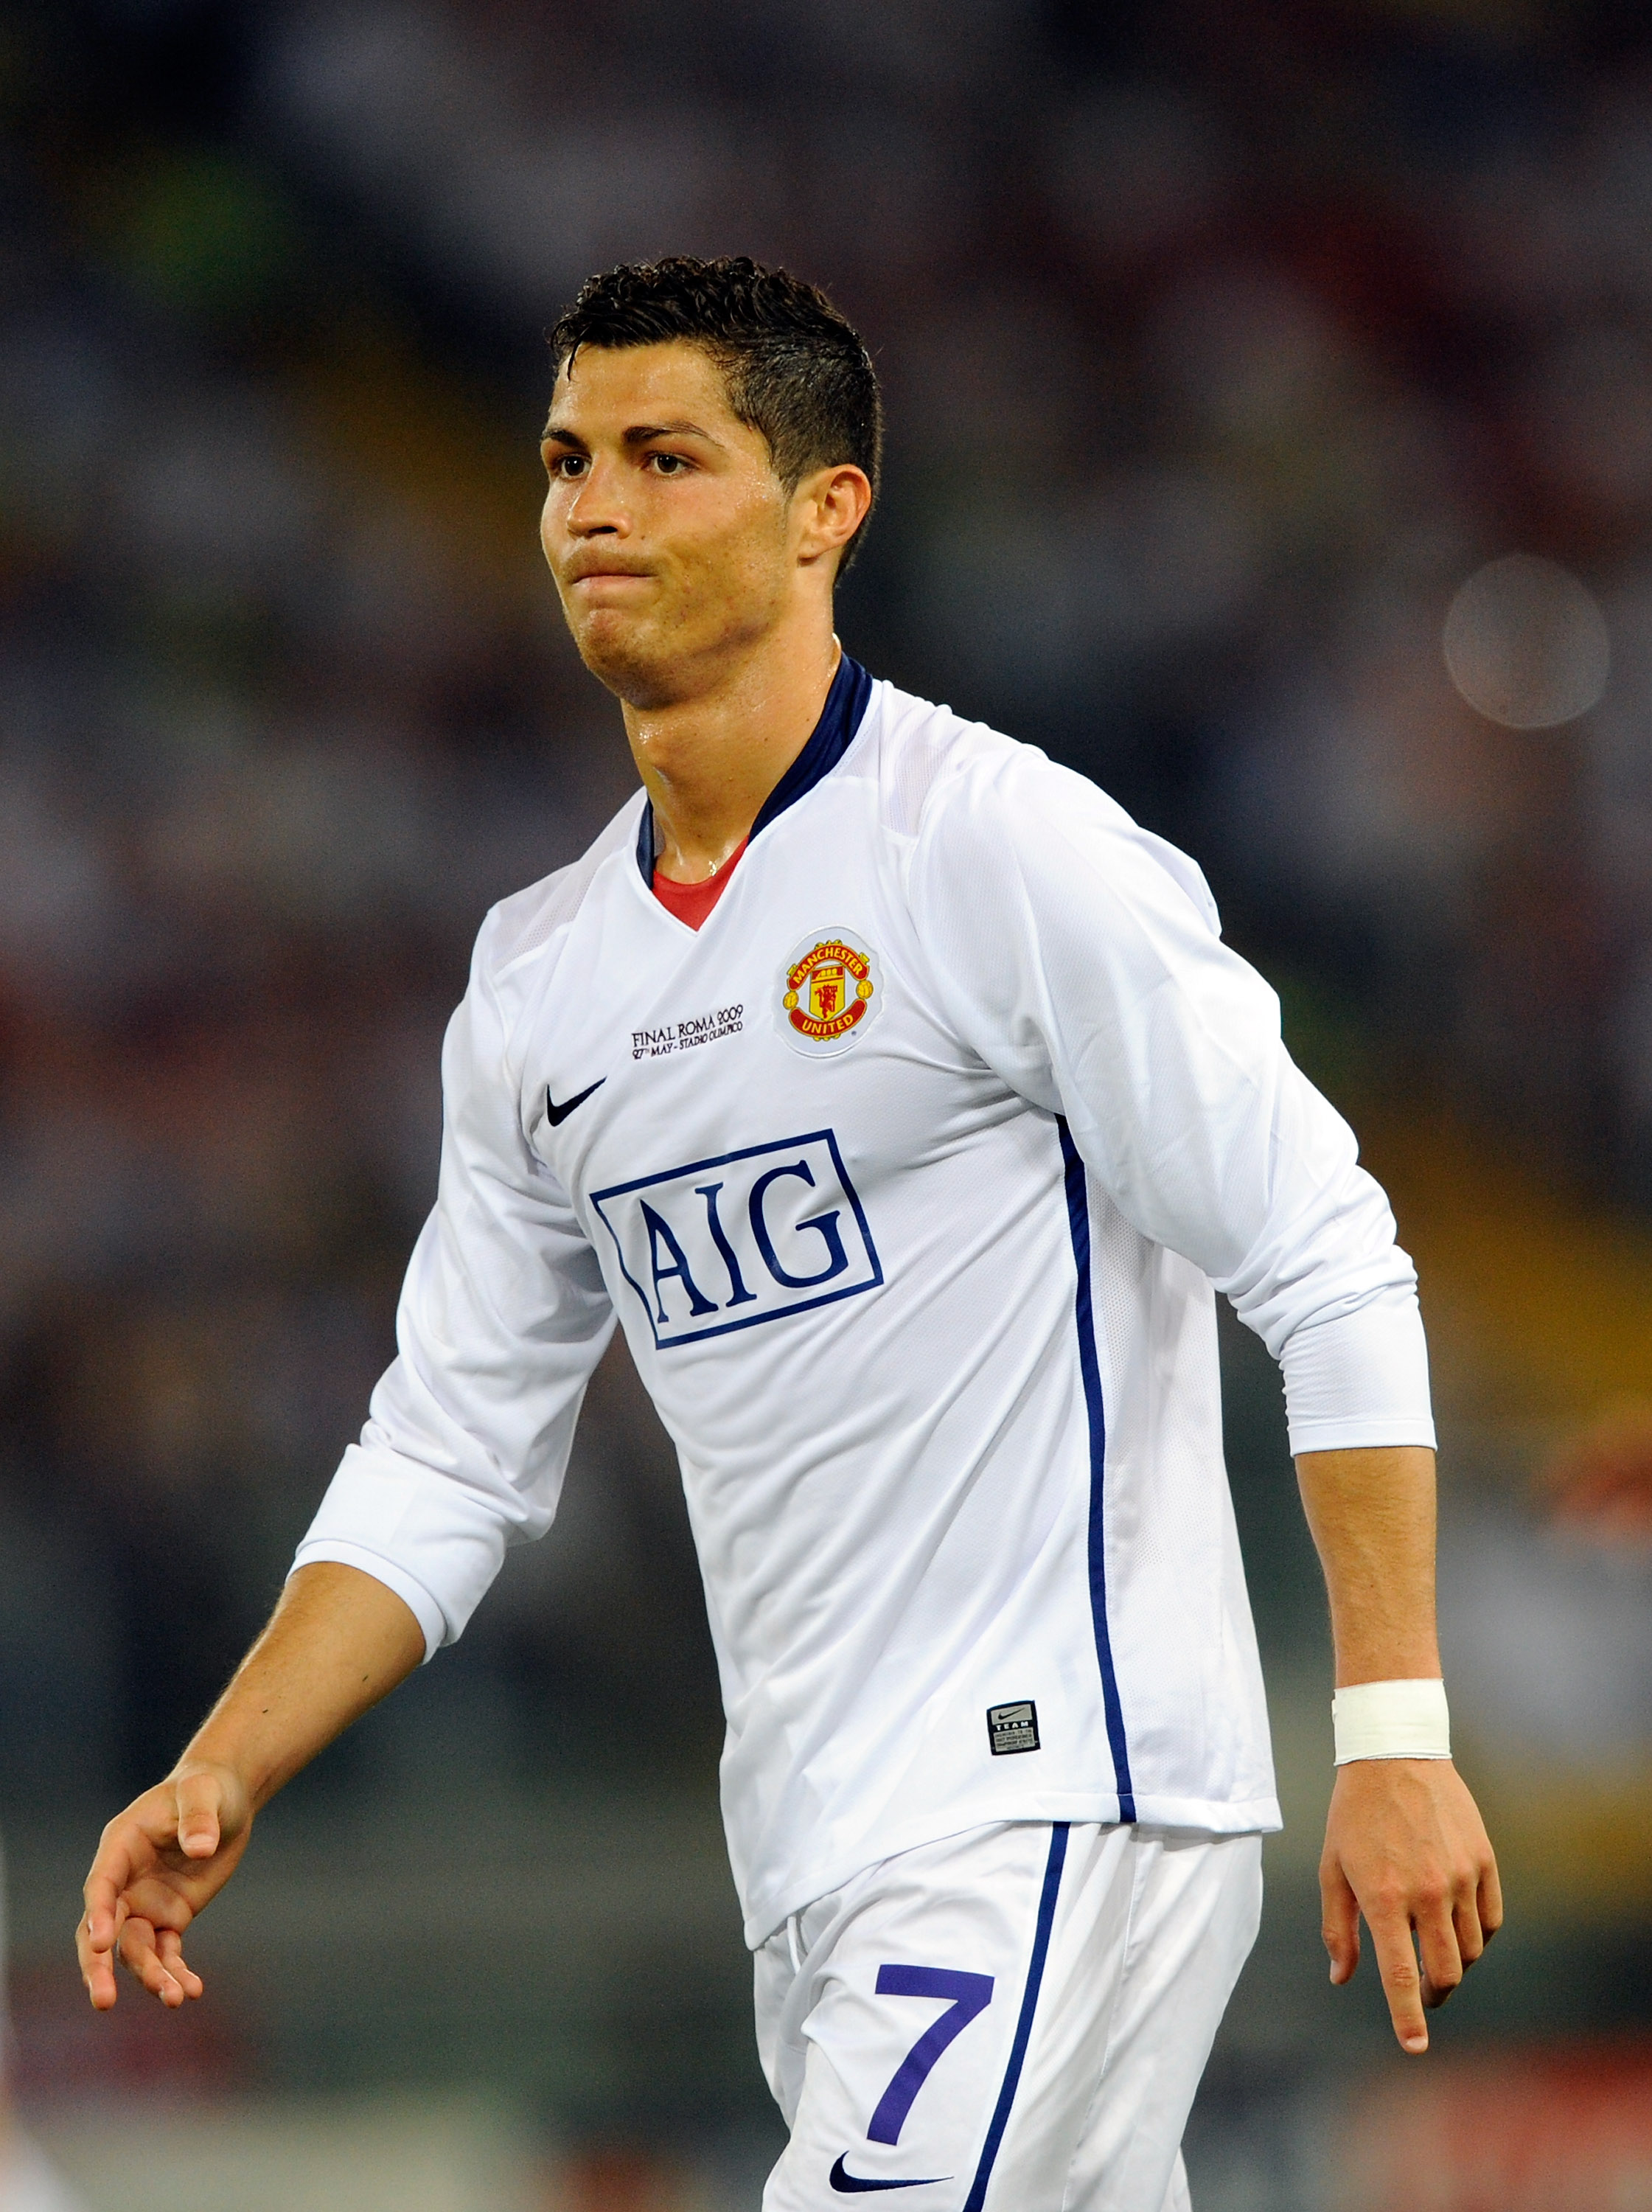 ROME, ITALY - MAY 27:  Cristiano Ronaldo of Manchester United during the UEFA Champions League Final match between Barcelona and Manchester United at the Stadio Olimpico on May 27, 2009 in Rome, Italy.  (Photo by Claudio Villa/Getty Images)